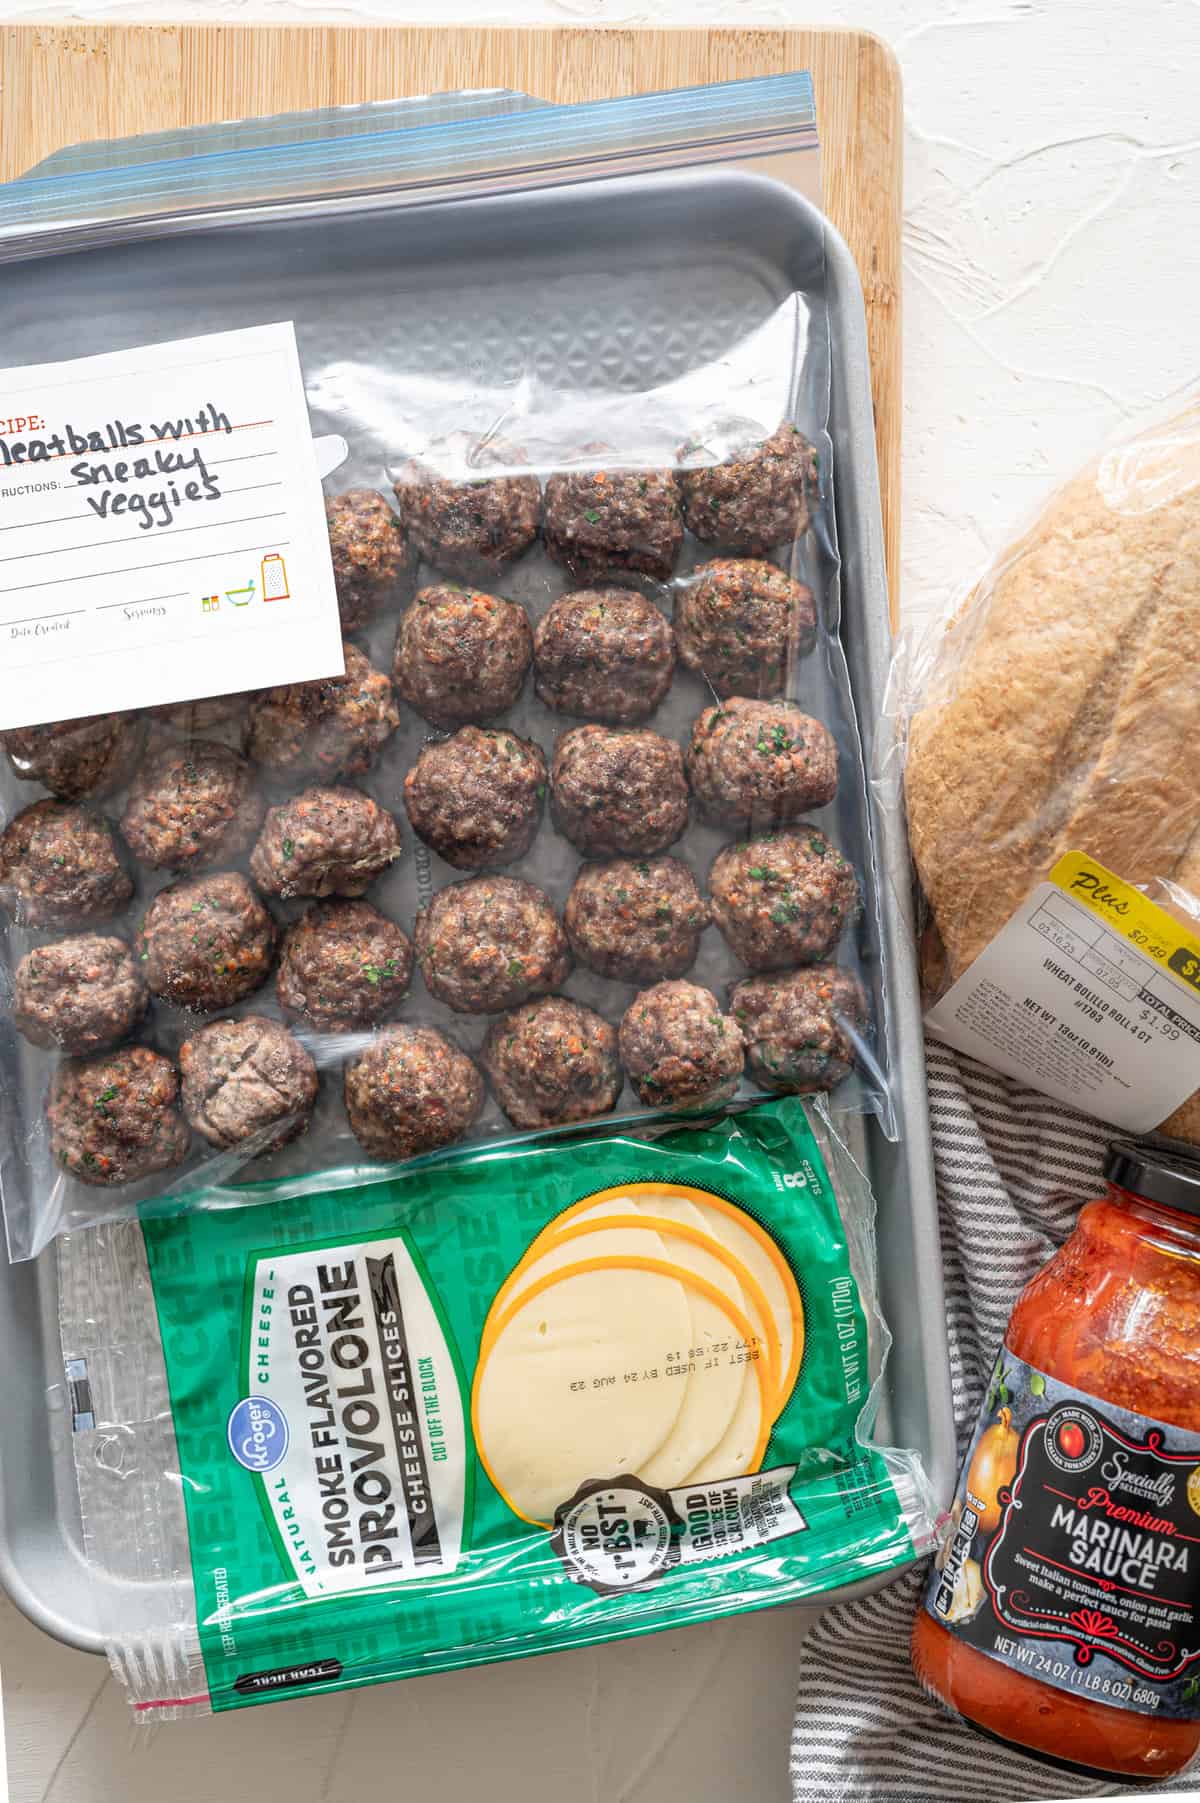 Freezer meal kit for easy meatball subs.